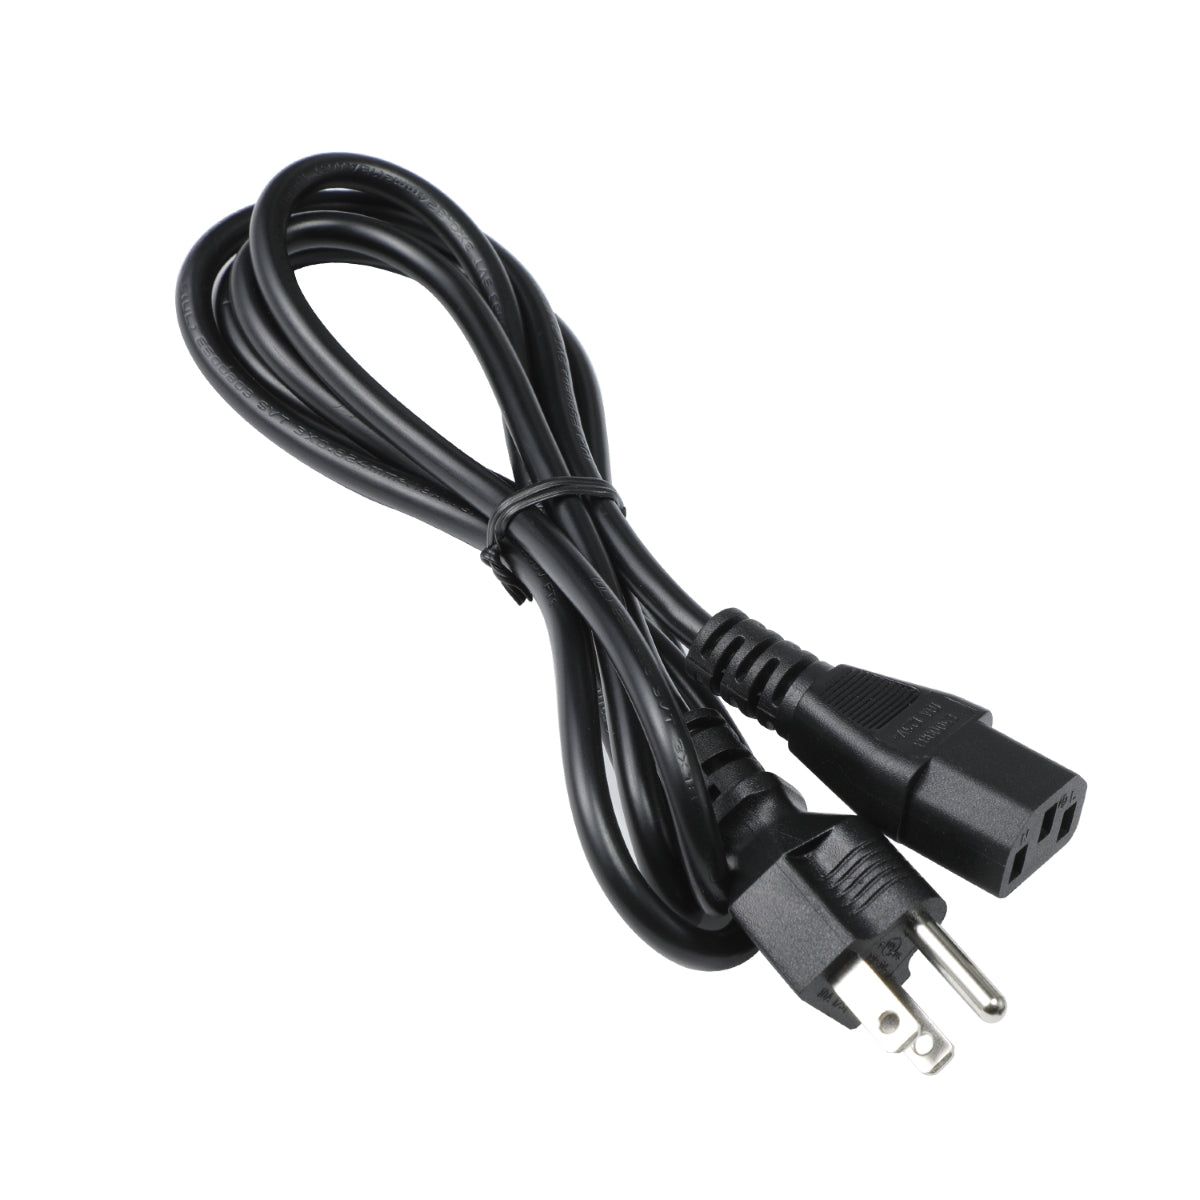 Power Cord for Samsung LF27T850QWNXZA Monitor TV.